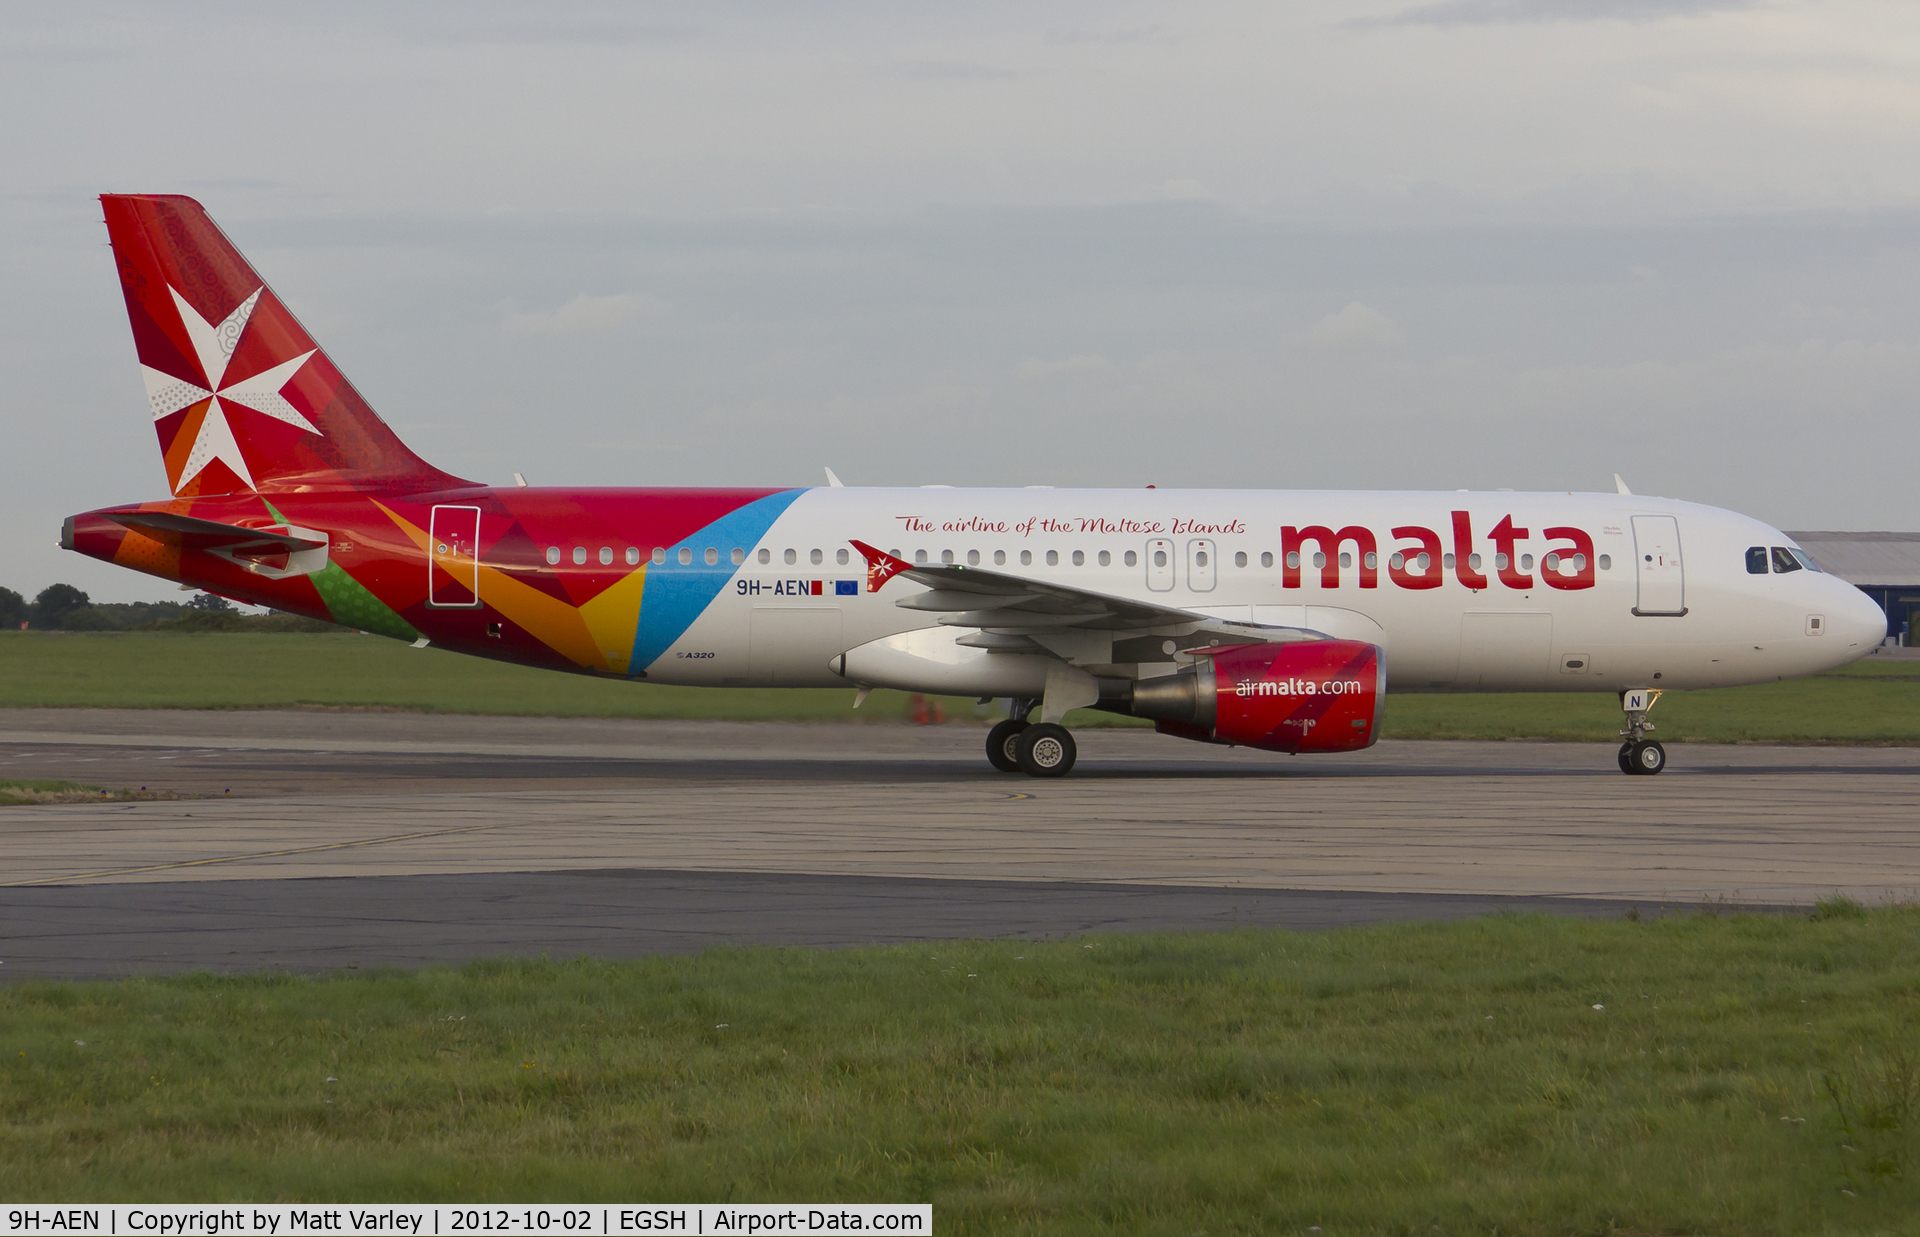 9H-AEN, 2005 Airbus A320-214 C/N 2665, AMC5144 arriving at EGSH in Air Malta's latest livery.